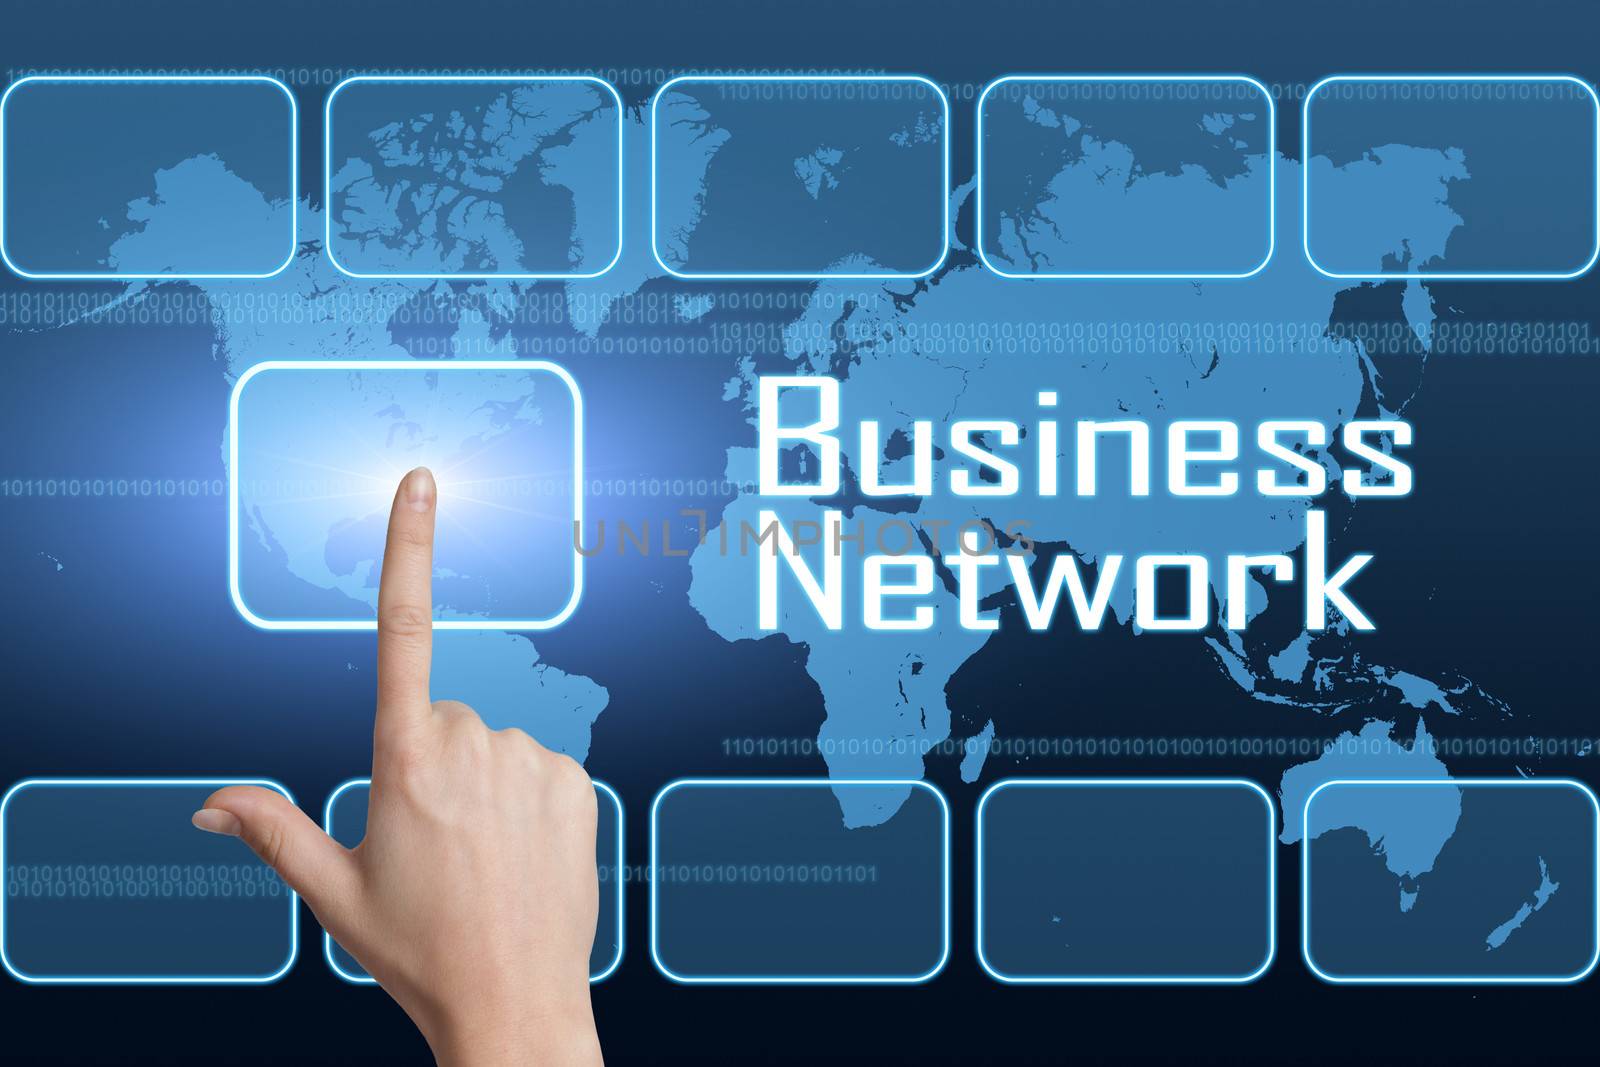 Business Network concept with interface and world map on blue background